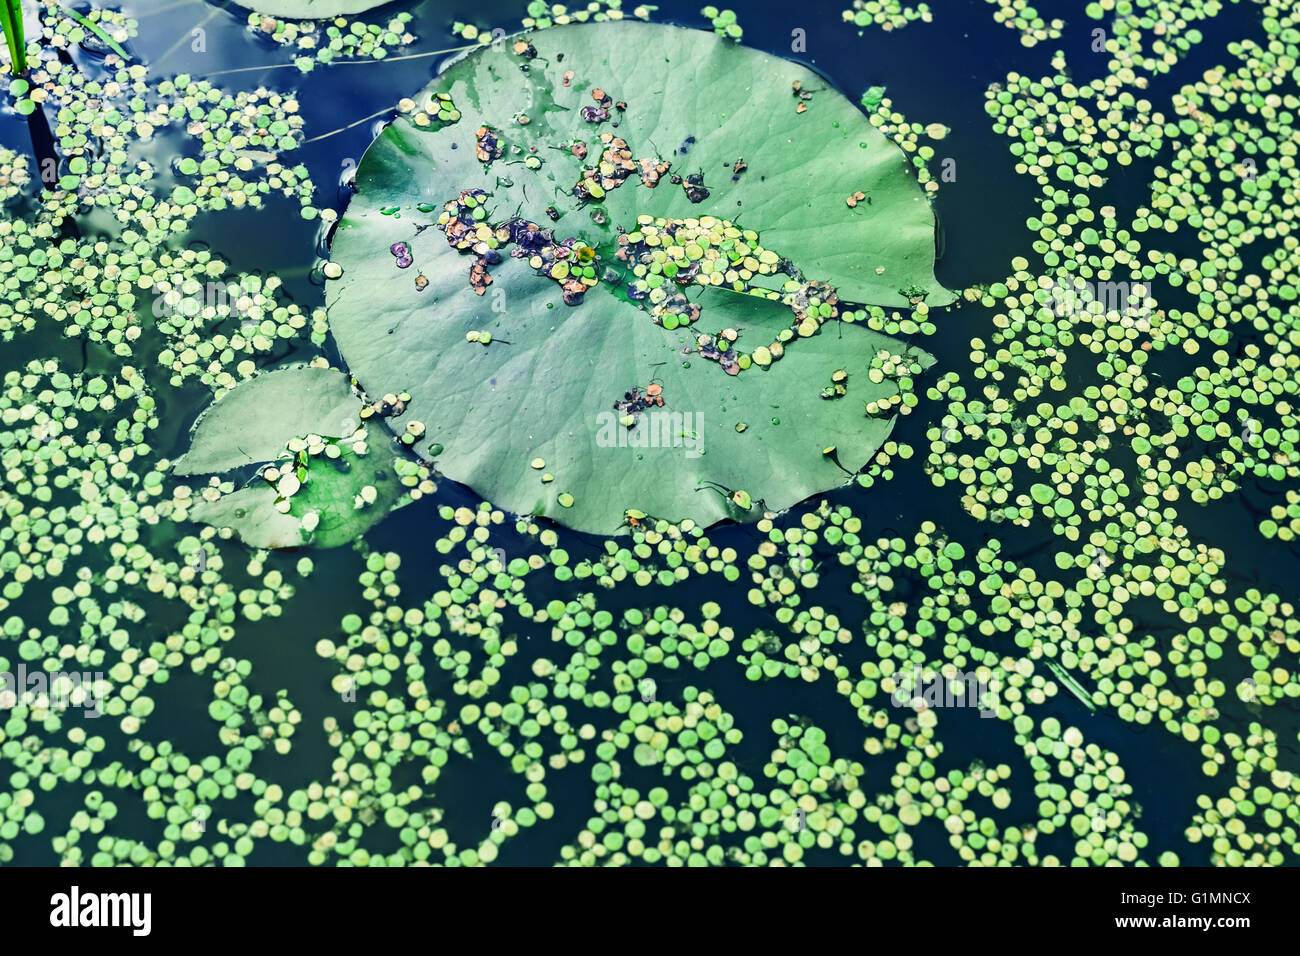 Green duckweed on water and lily leaf Stock Photo